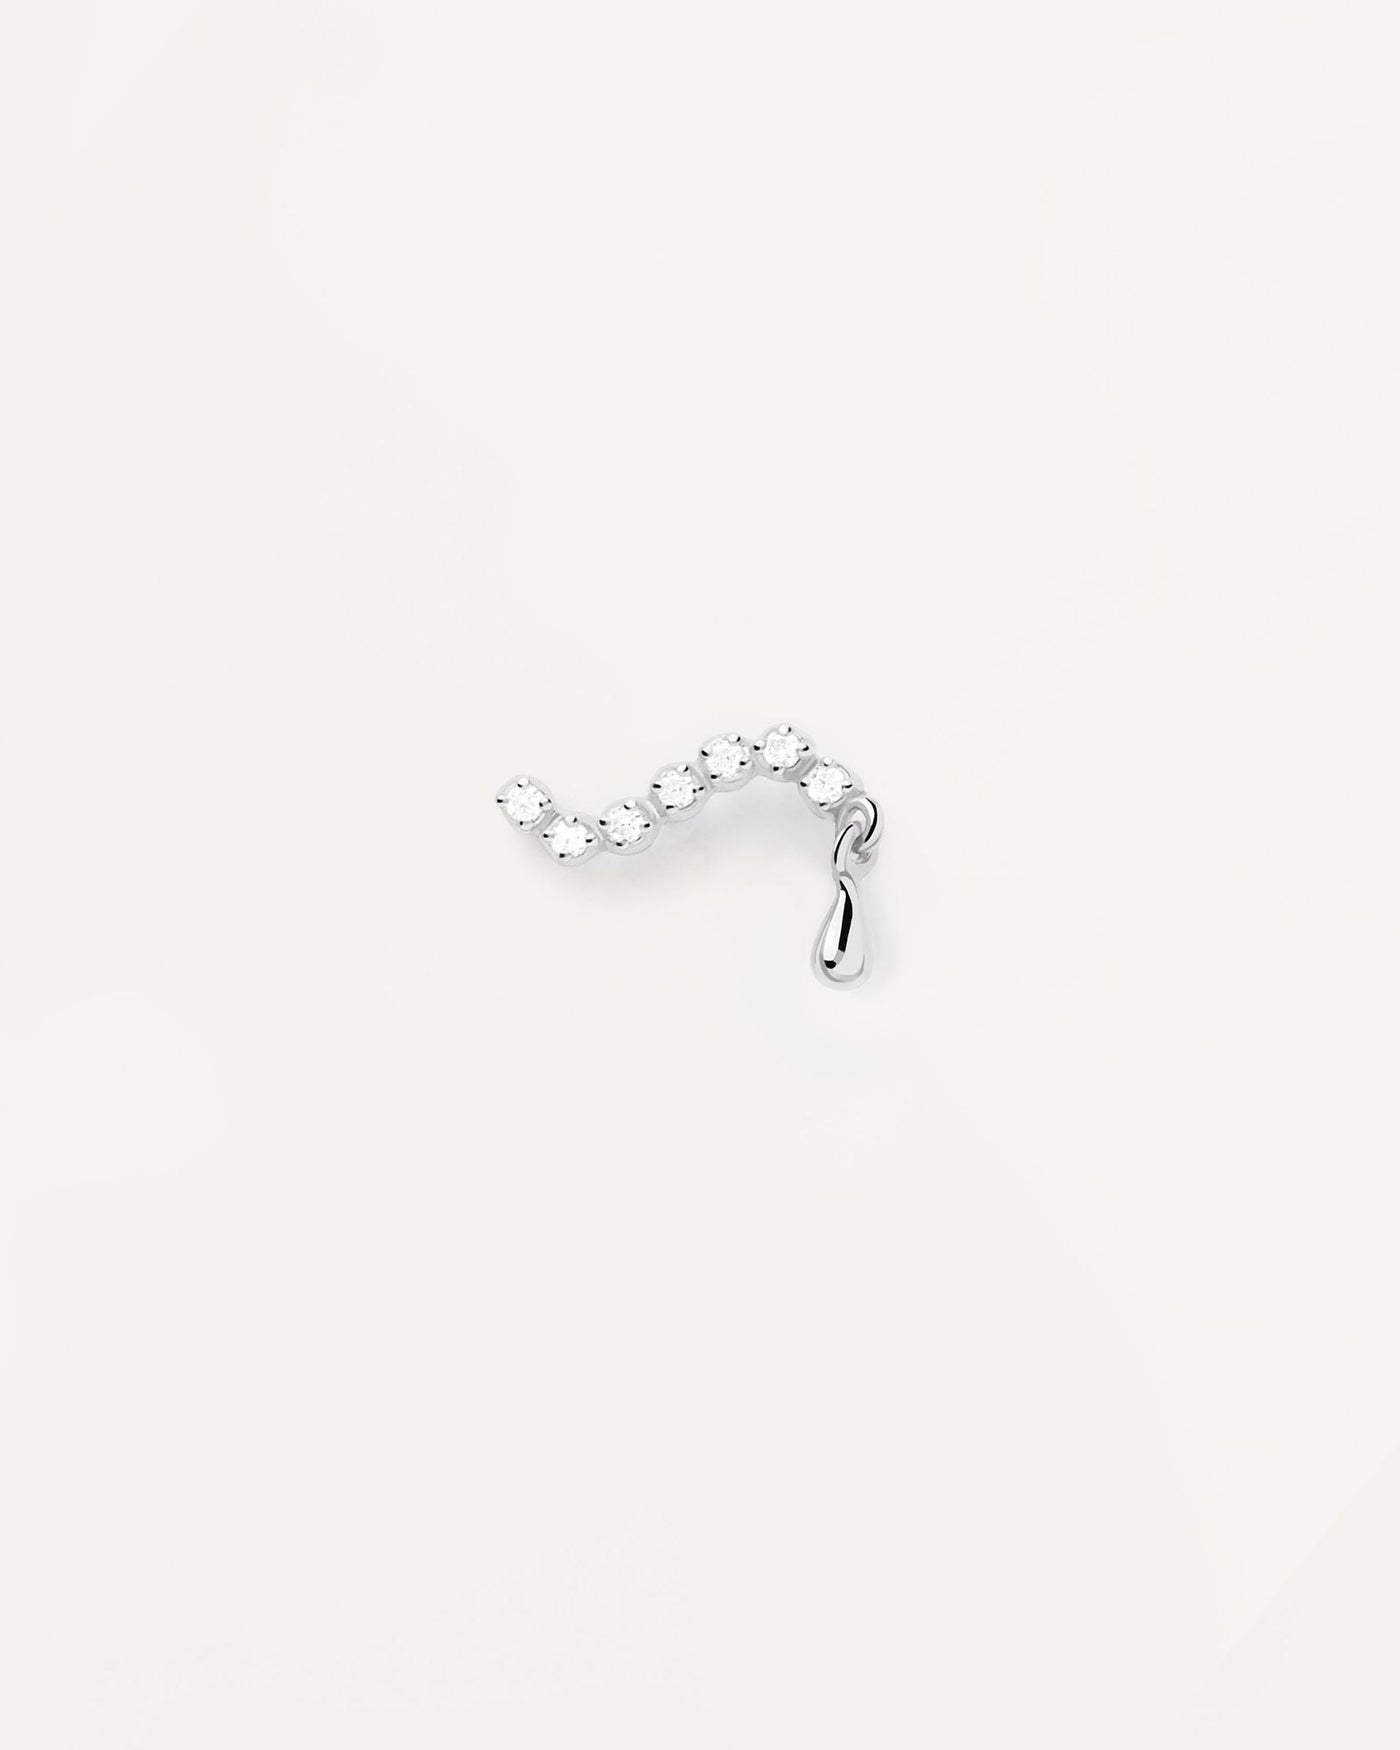 2024 Selection | Swim silver single stud Earring. Wavy ear piercing in sterling silver with white zirconia and drop pendant. Get the latest arrival from PDPAOLA. Place your order safely and get this Best Seller. Free Shipping.